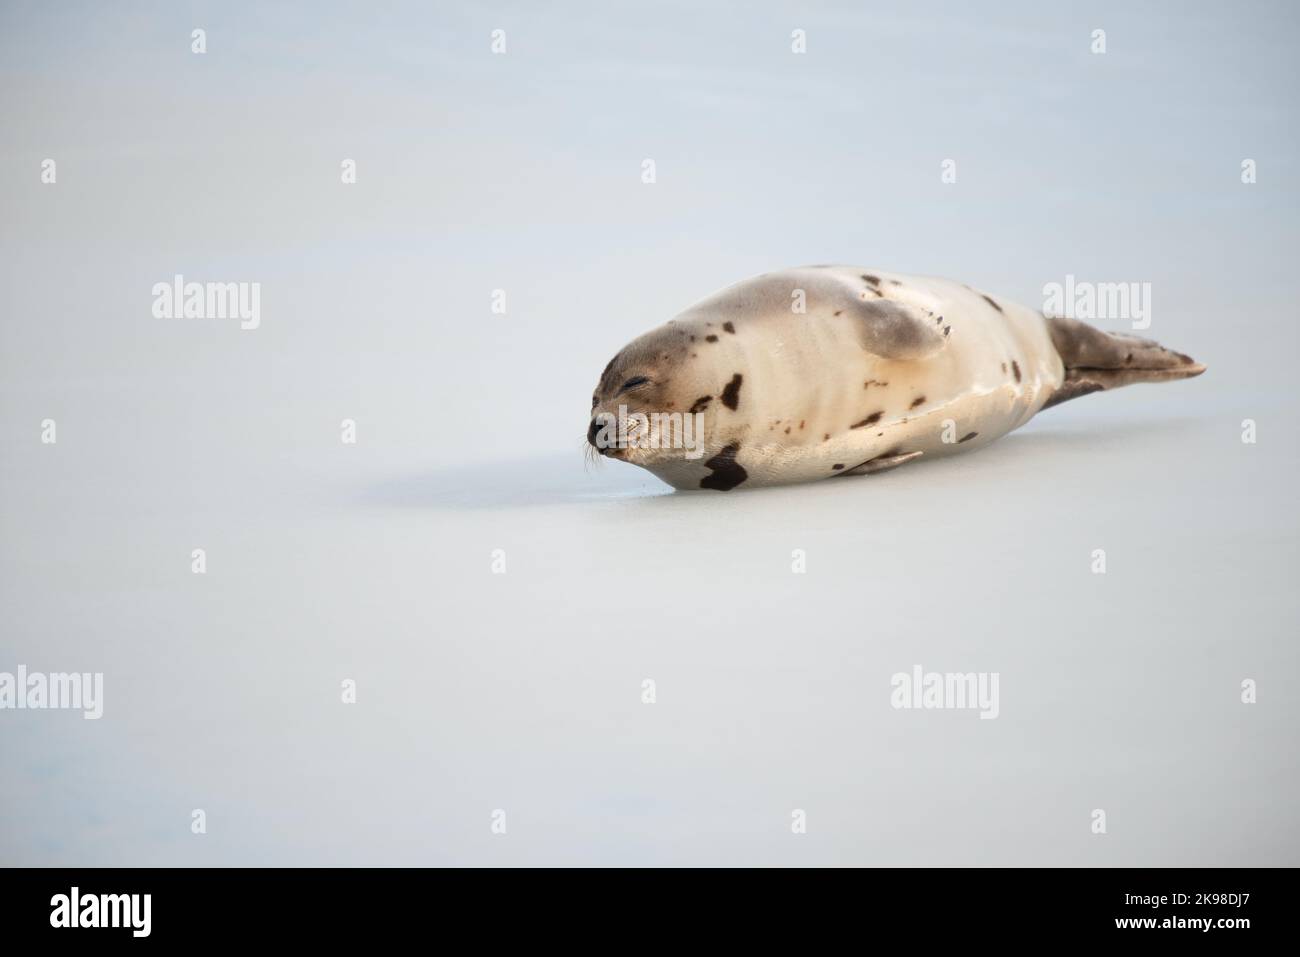 A small wild harbor harp seal pup laying on cold frozen ice in the North Atlantic Ocean. It is stretching its neck and flippers outward. The seal's t Stock Photo